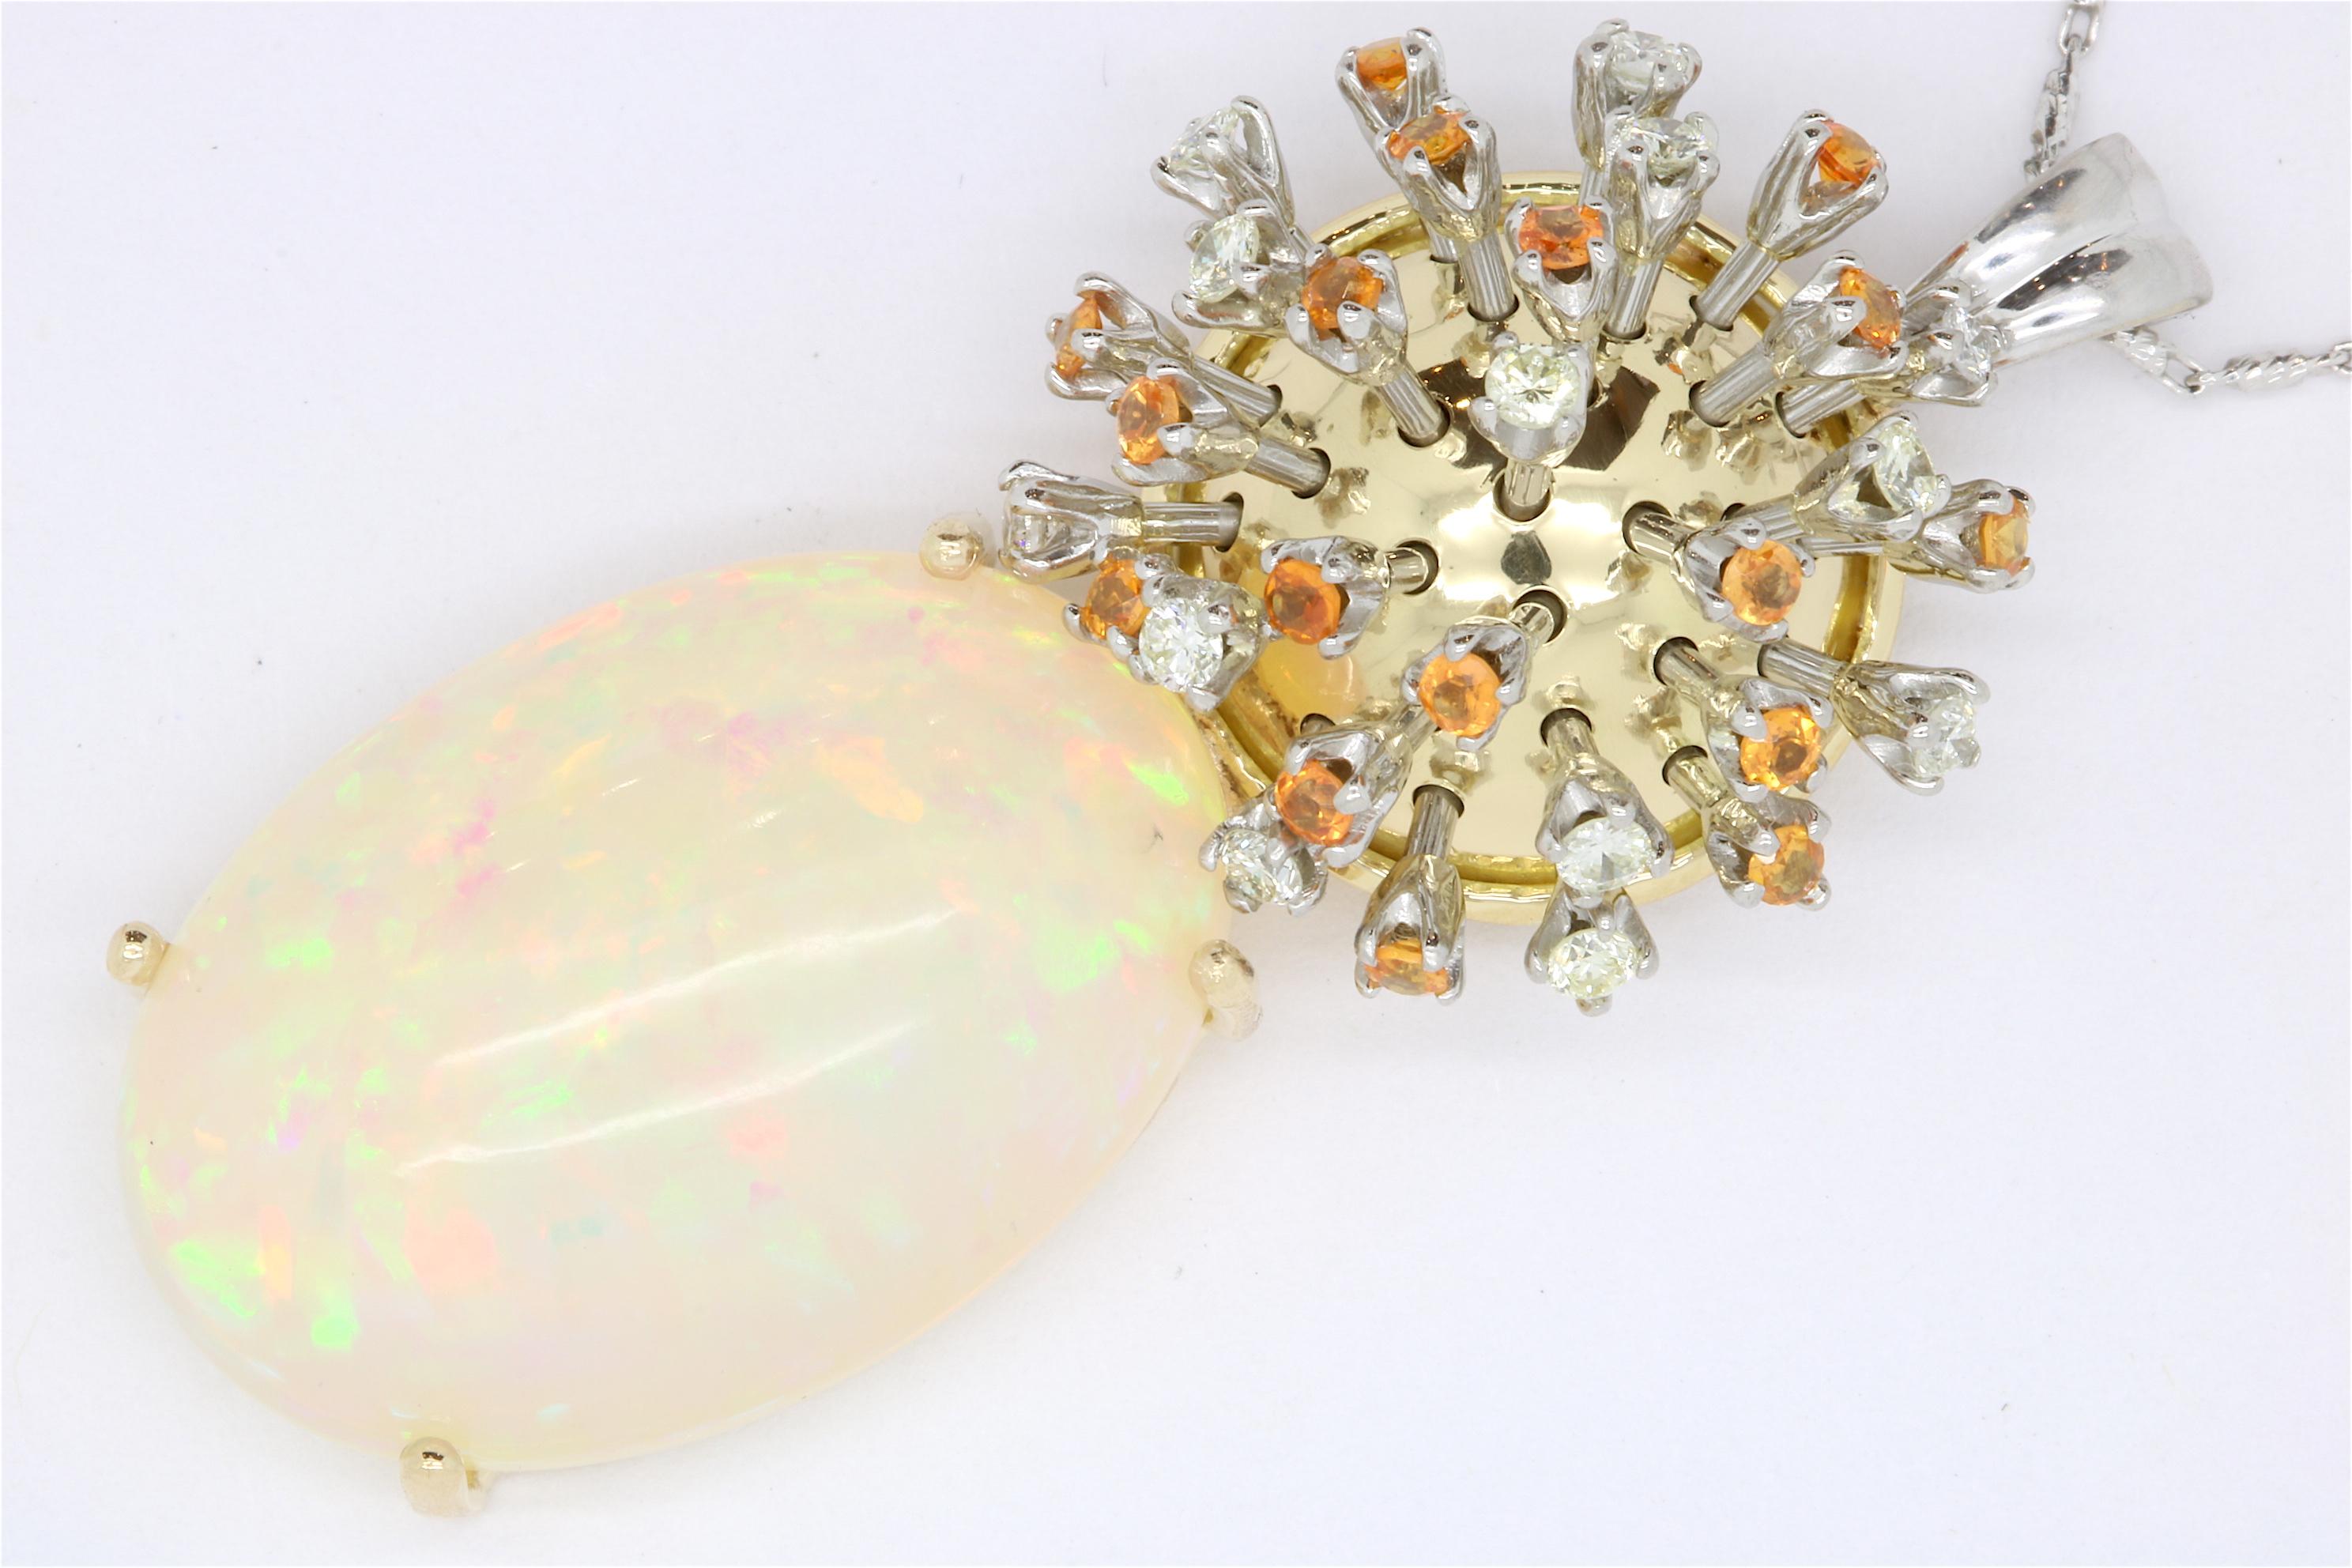 Material: 14k Two-Tone Gold 
Center Stone Detail:  1 Oval Opal at 18.19 Carats
Stone Details:  13 Round White Diamonds at 0.51 Carats - Clarity: SI / Color: H-I, 17 Orange Sapphires at 0.65 Carats
Chain Length:  18 Inch

Fine one-of-a-kind